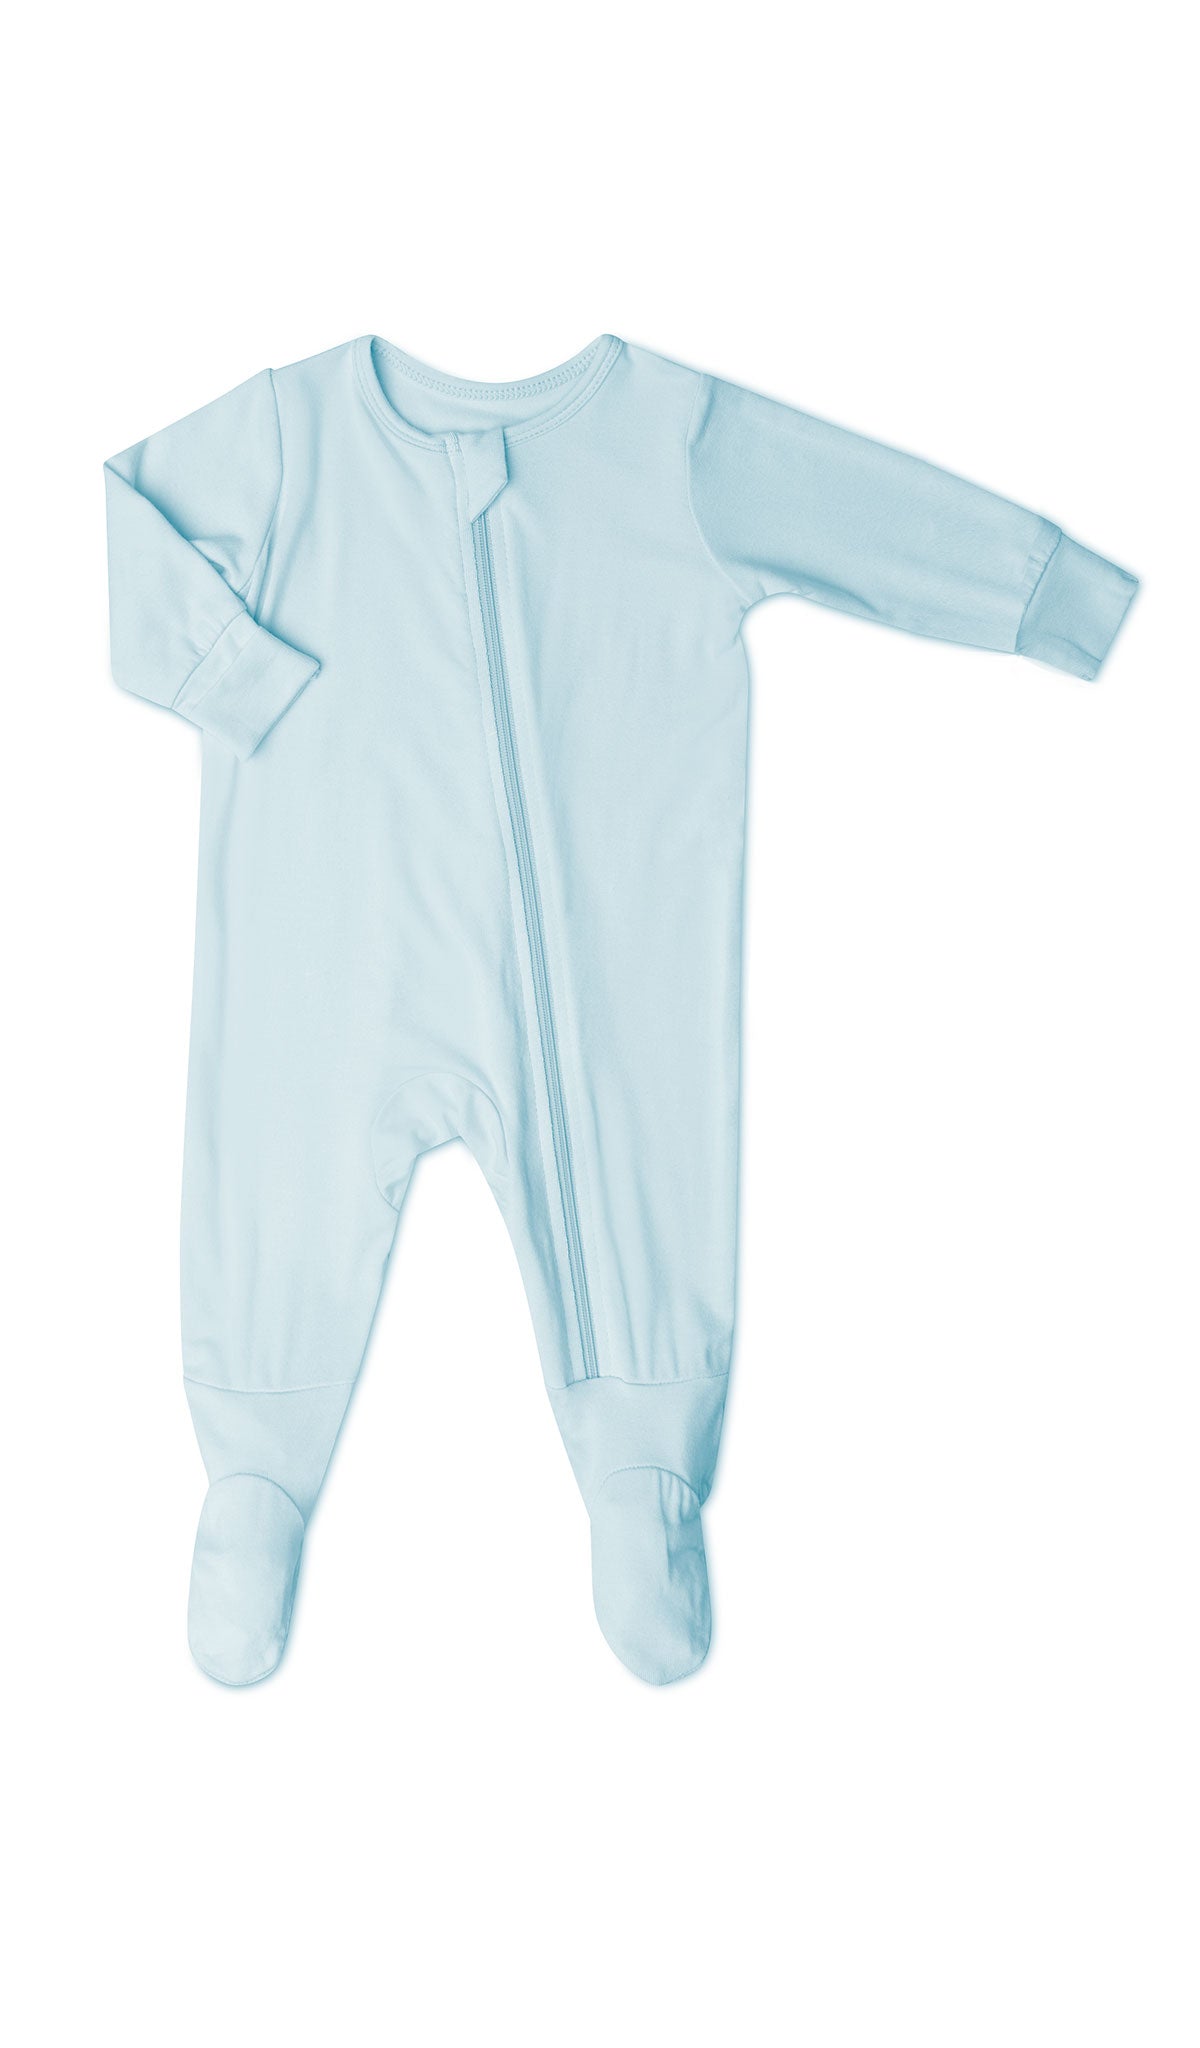 Whispering Blue Footie with long sleeves and zip front.